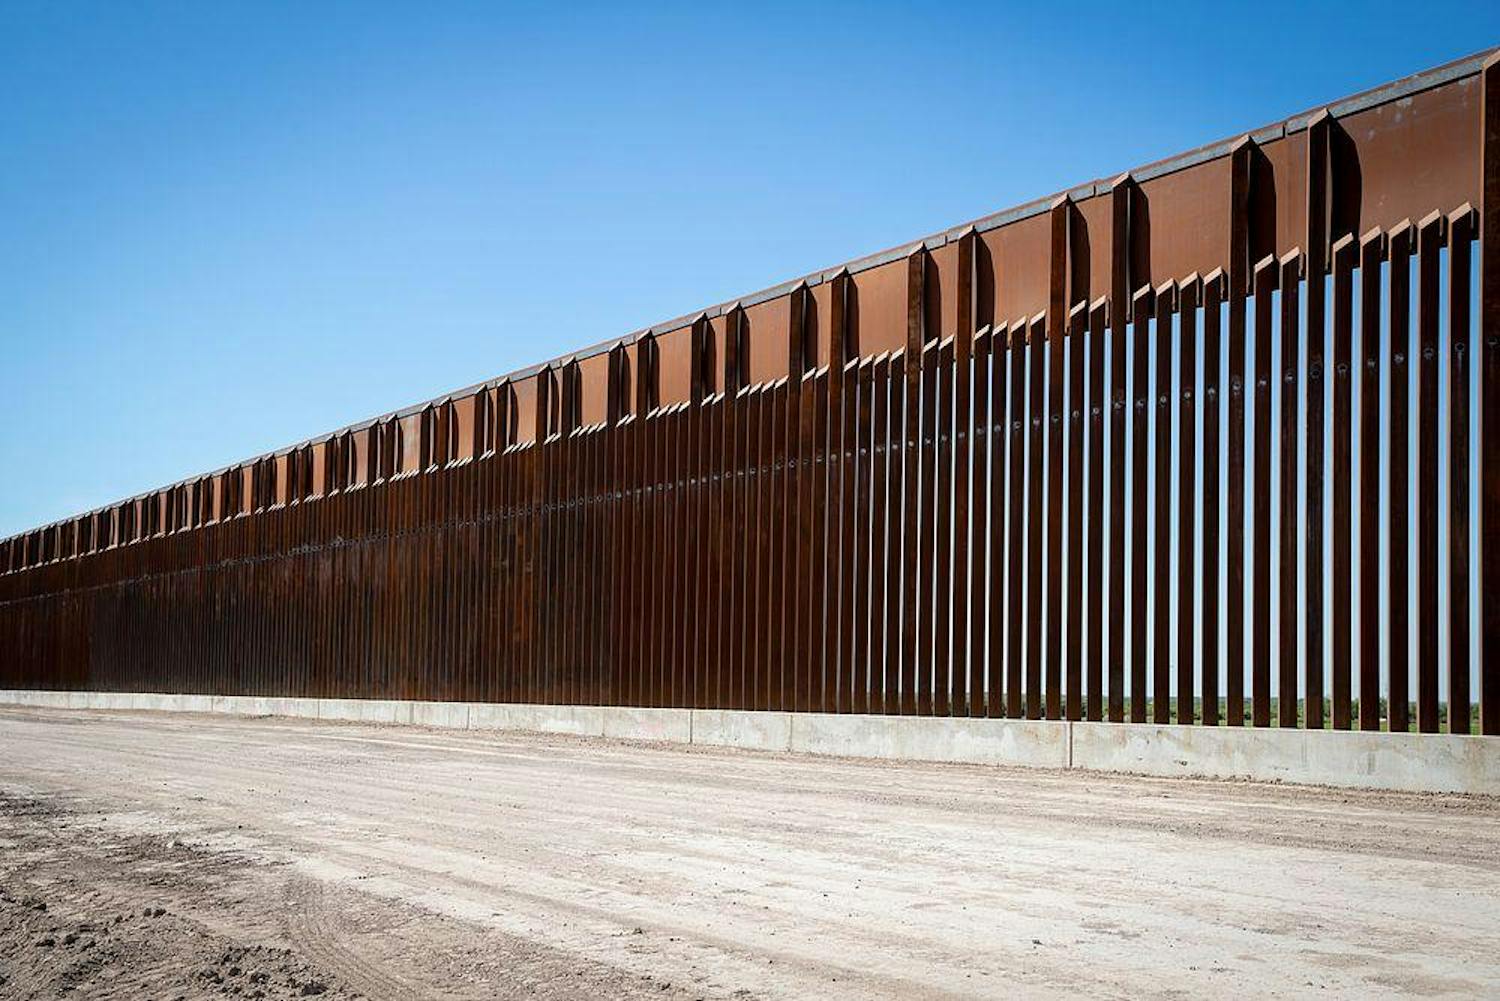 Recently constructed panels at the new border wall system project near McAllen, Texas